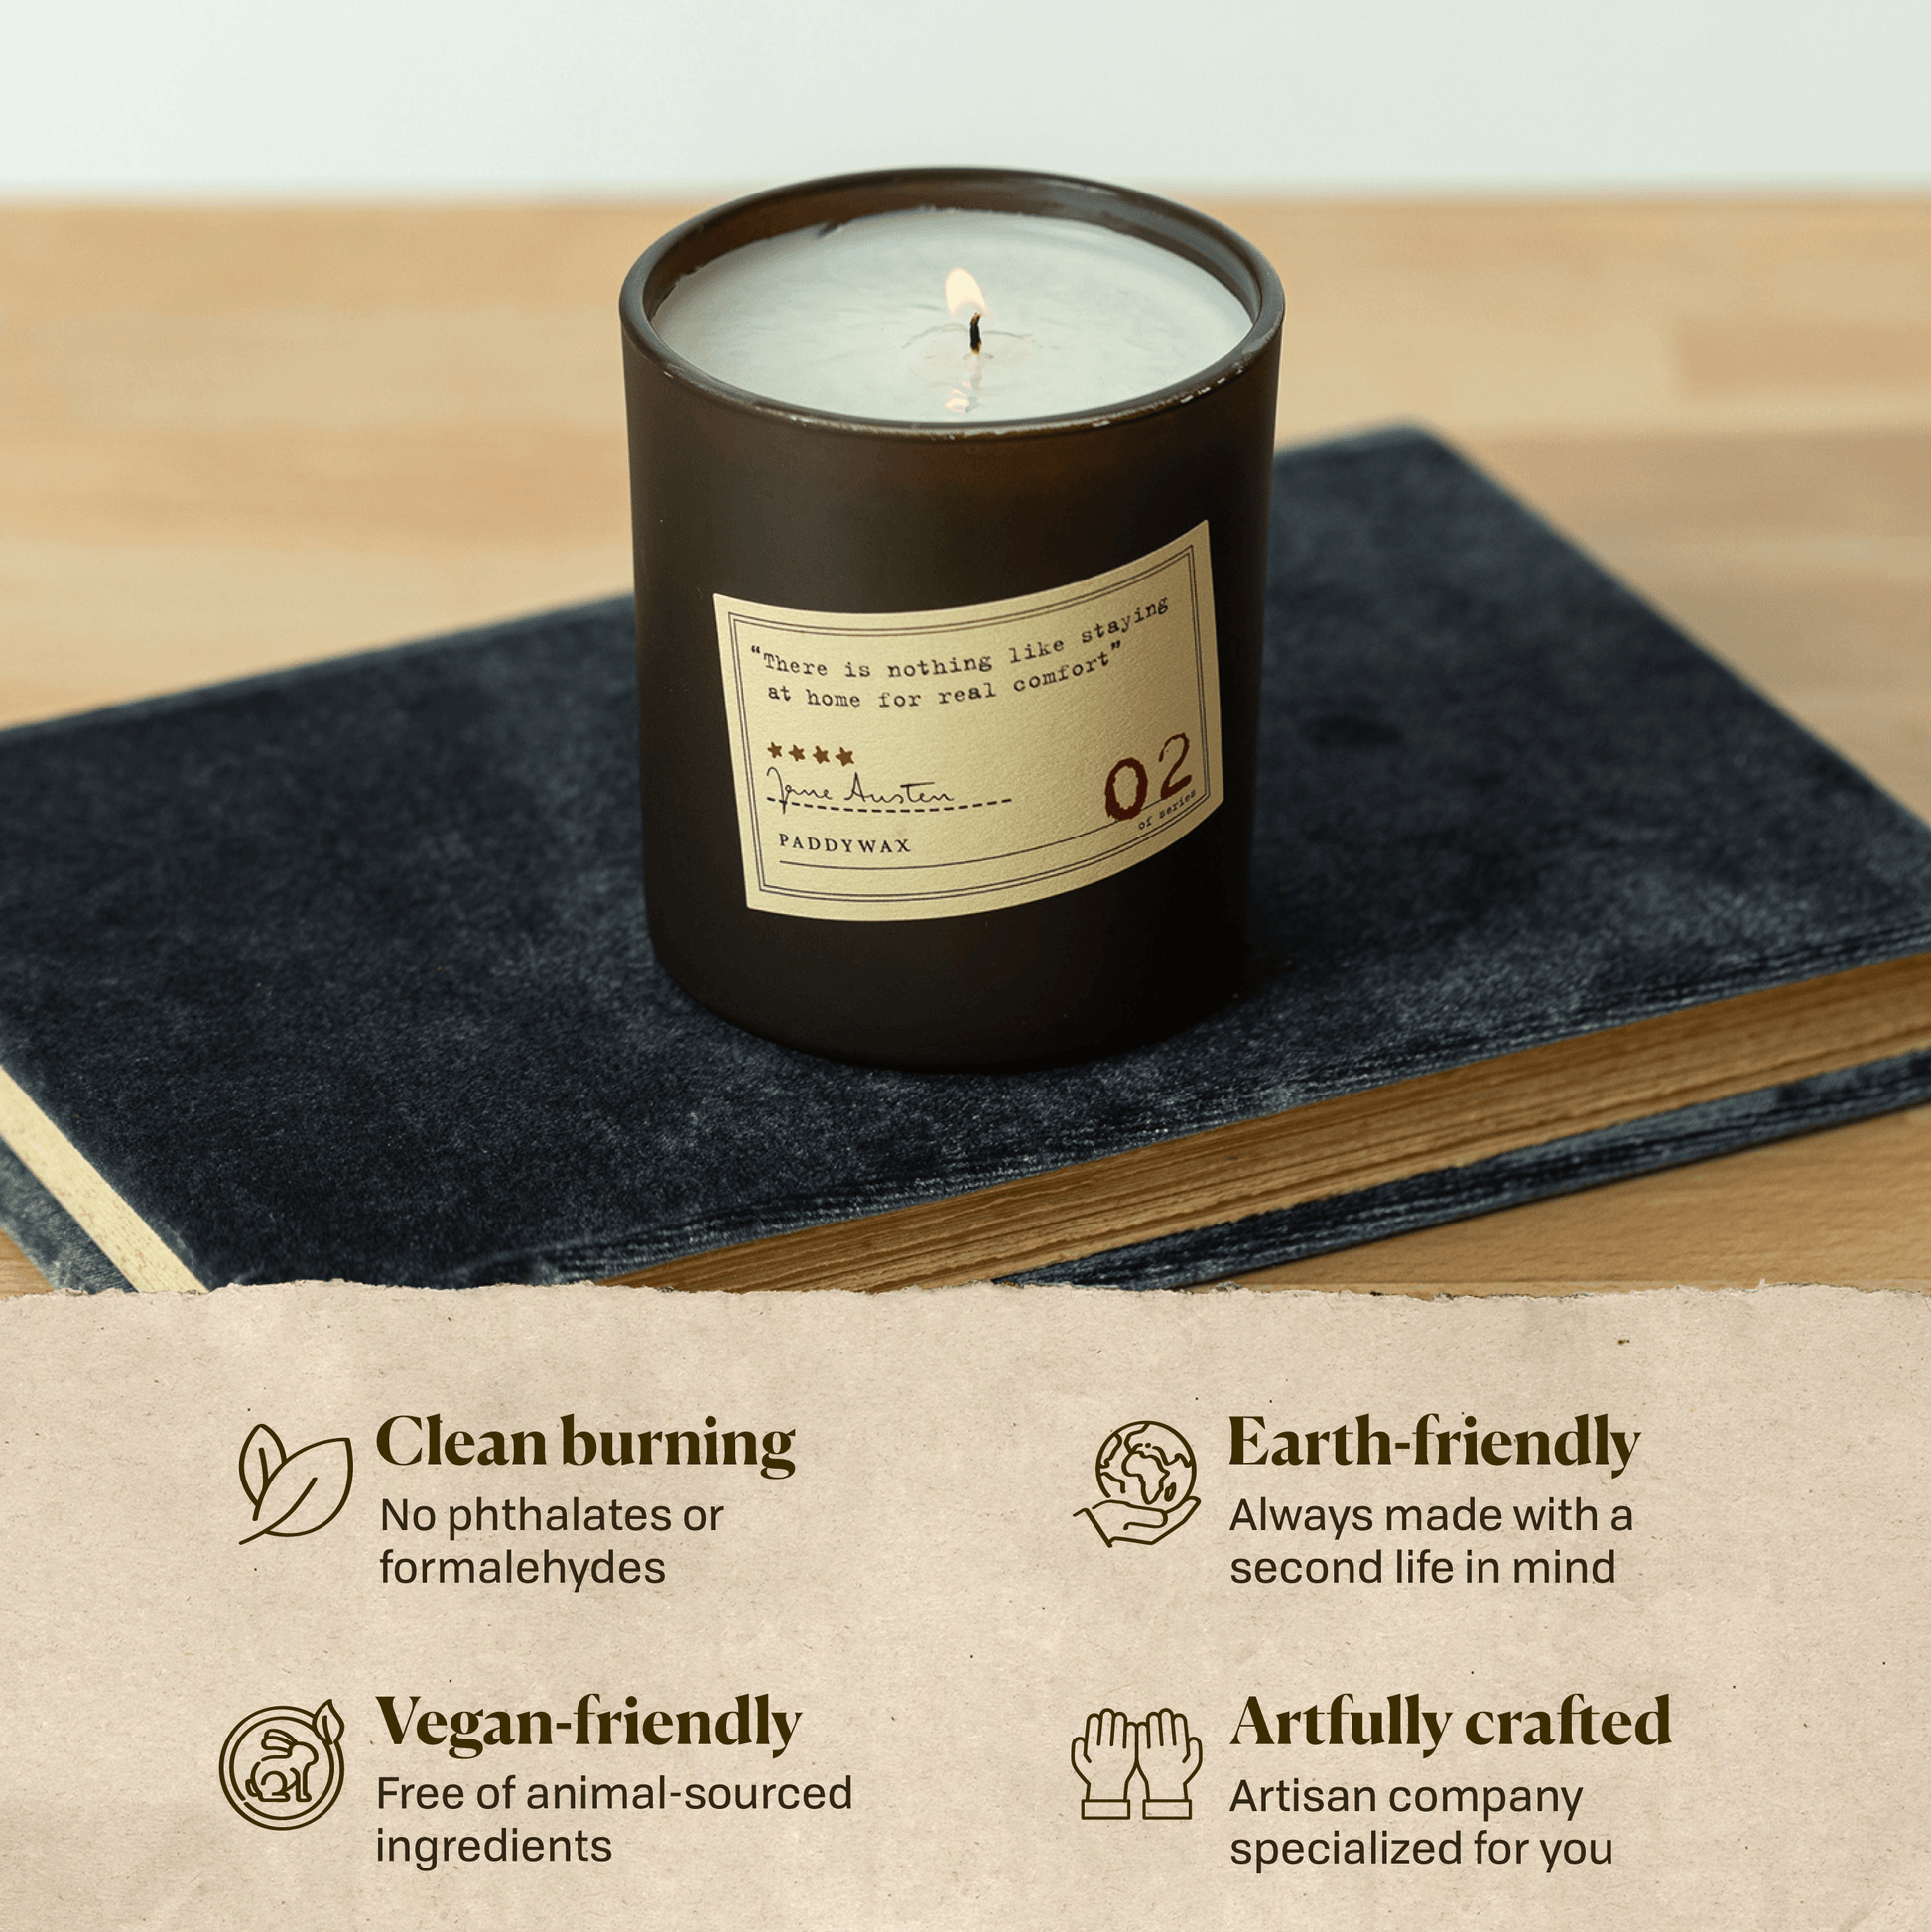 Library 6 oz Candle - Jane Austen – Paddywax